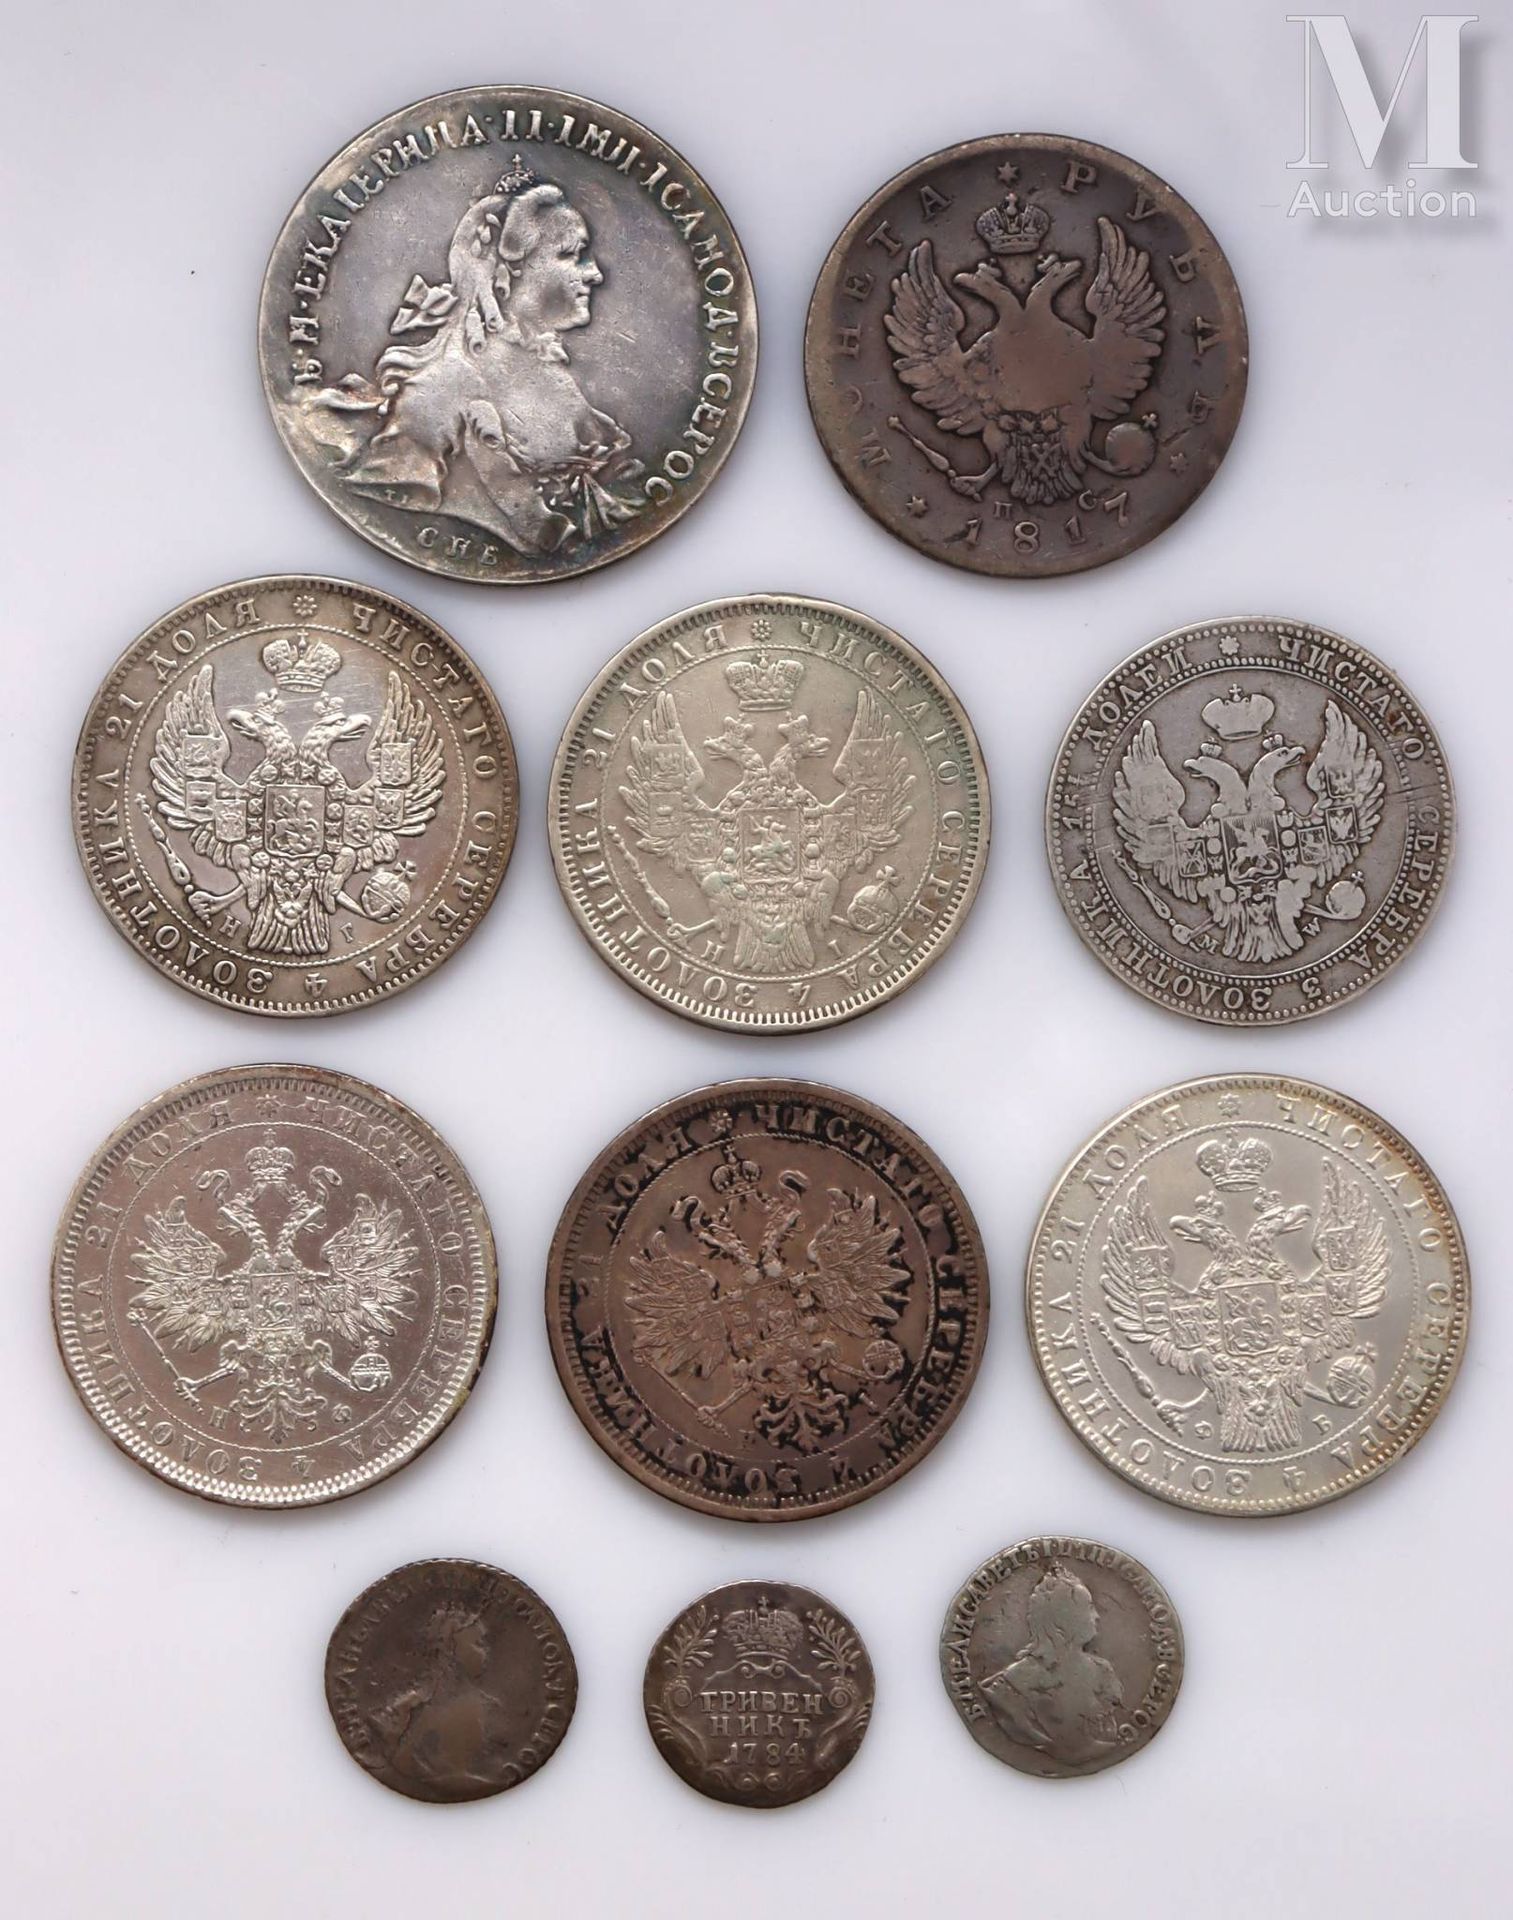 Russie - Divers Lot of eleven coins including:
-One rouble of Catherine II 1762
&hellip;